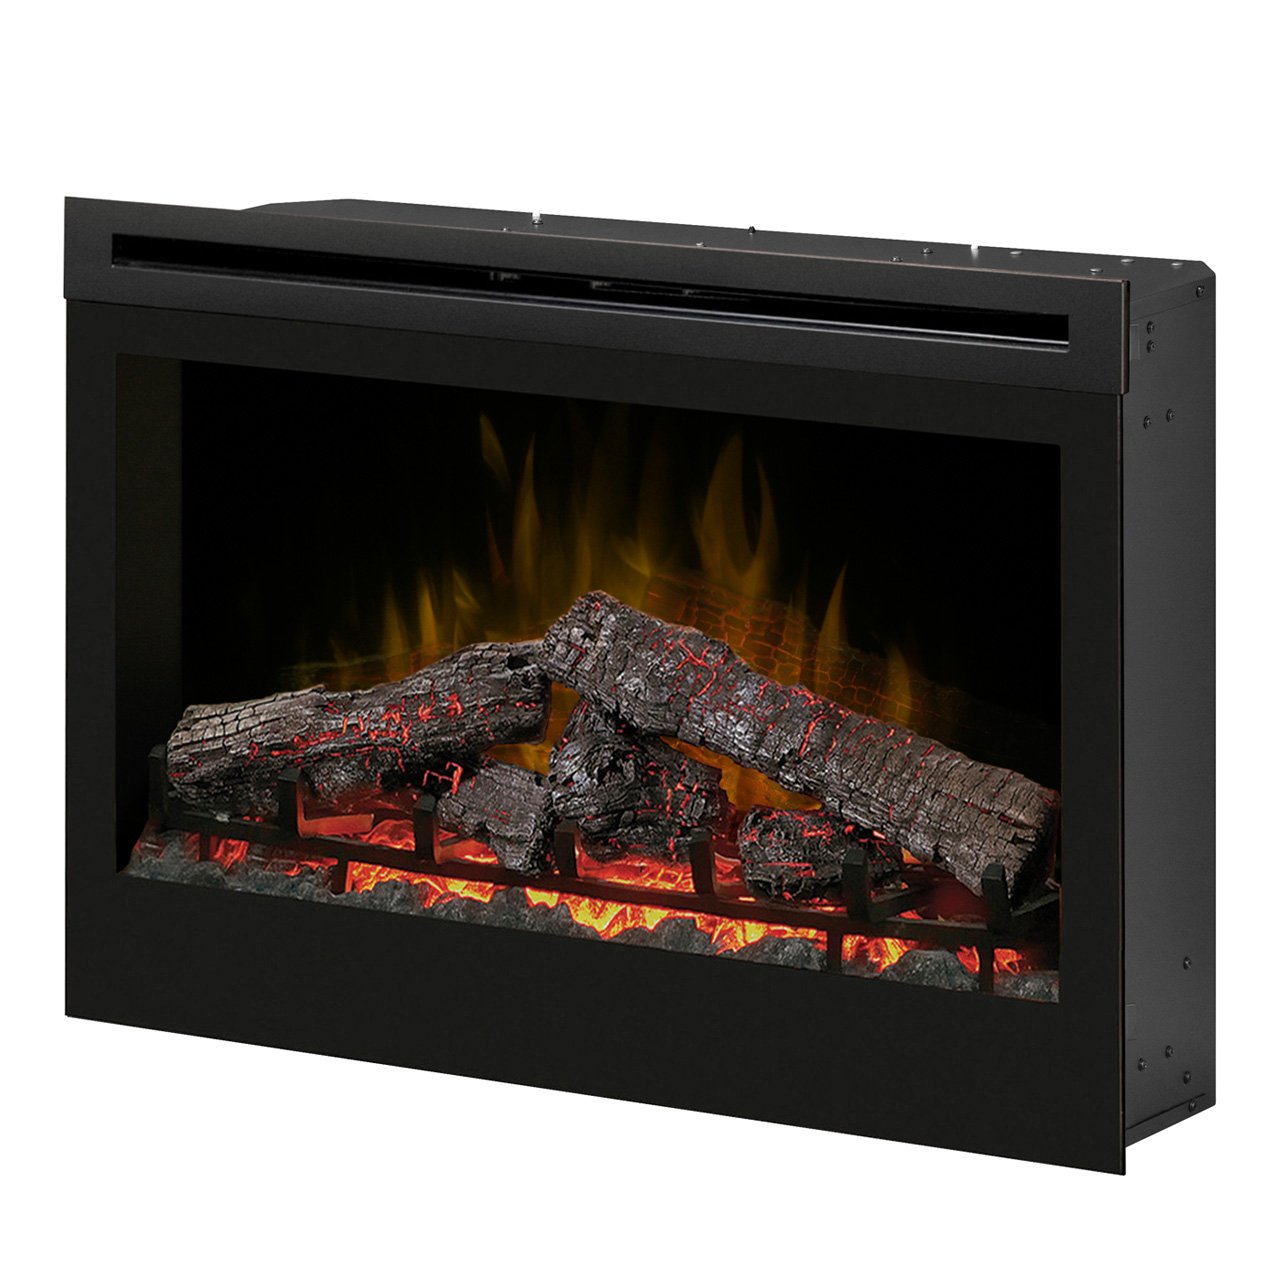 Electric Fireplace Logs with Remote Control Lovely Dimplex Df3033st 33 Inch Self Trimming Electric Fireplace Insert